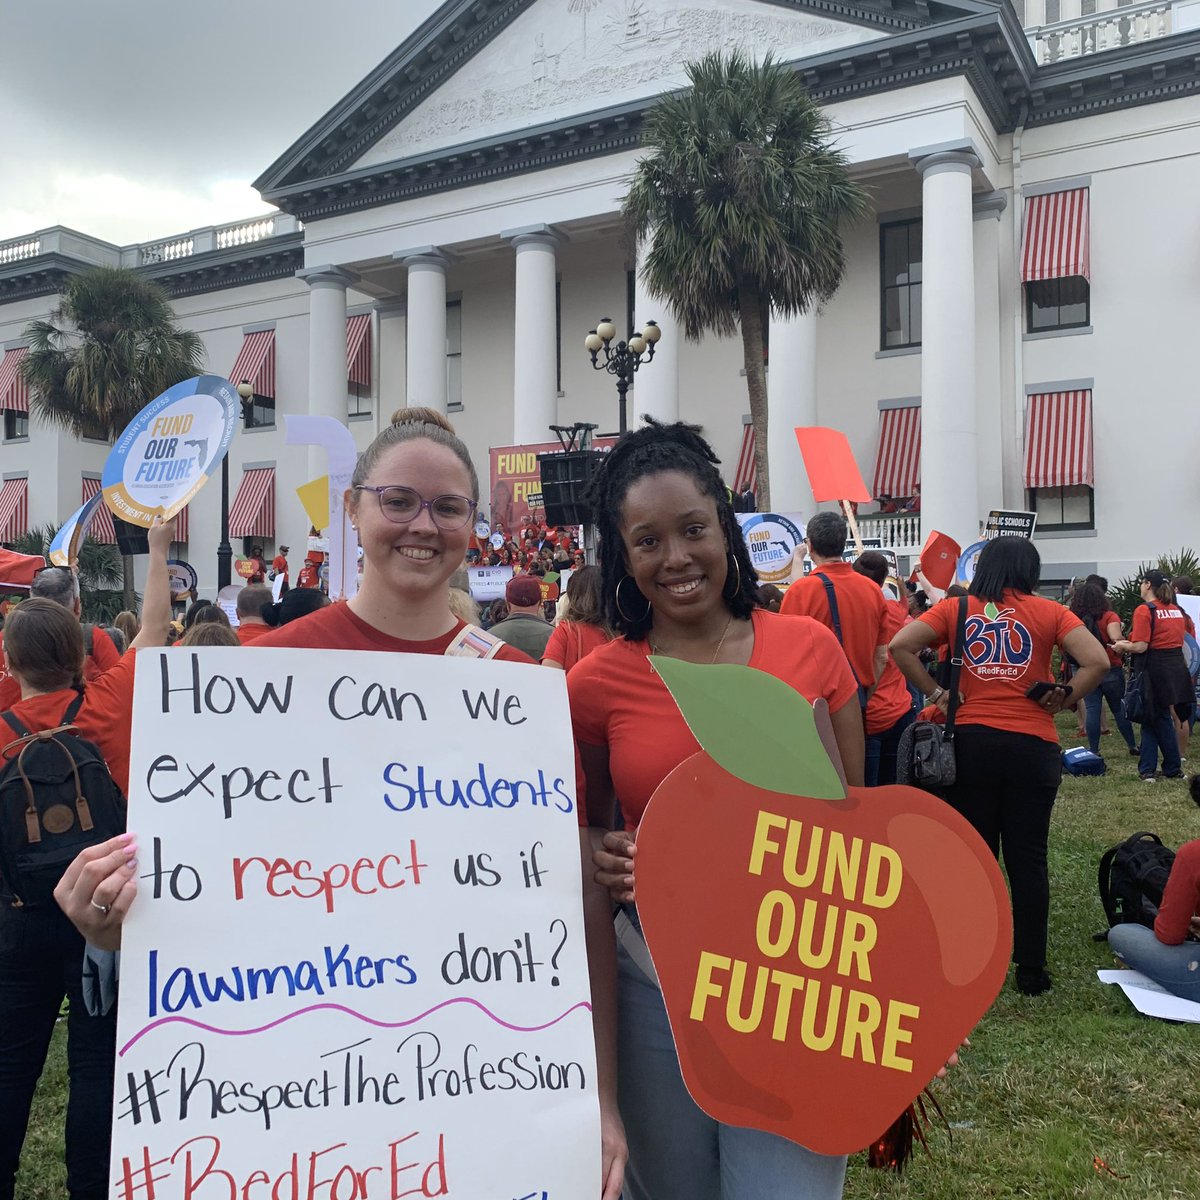 We Marched and we shouted! We must be the voice for not only ourselves, but our students! They deserve better! #TakeOnTallahassee #FundOurFutureFL #publiceducation